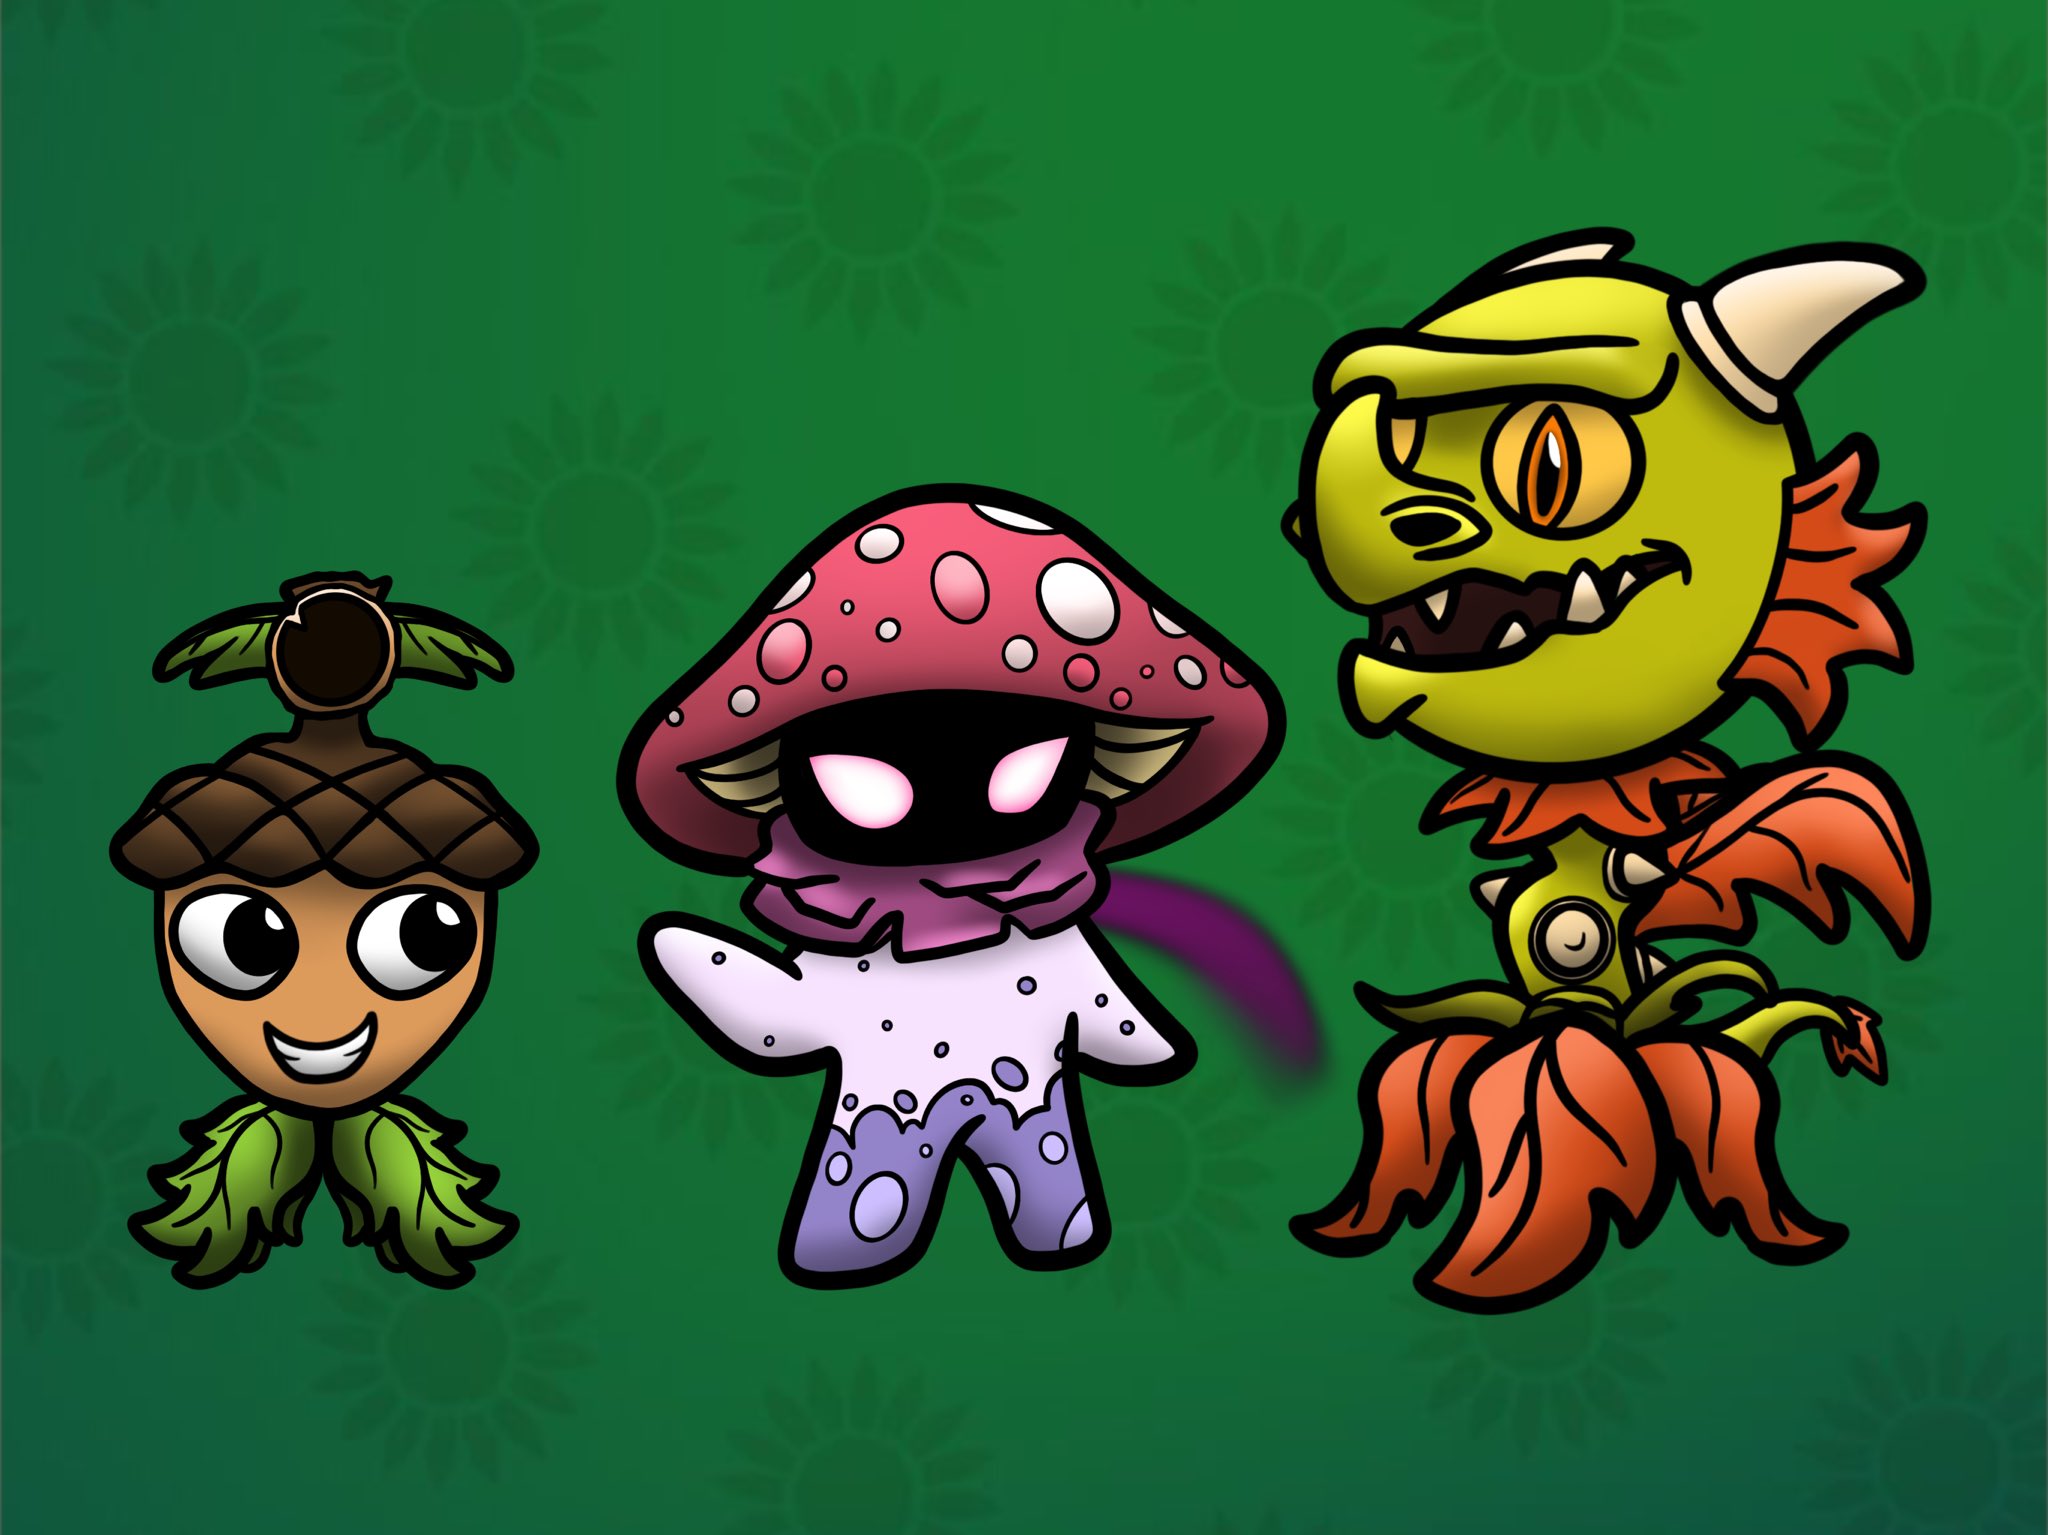 Pl🌲nts vs. Z🧠mbies on X: The #PvZ2 Costume Party Poll has concluded!  Congrats to Primal Sunflower and their adorable moose Antler costume! Keep  an eye in your games in the coming future